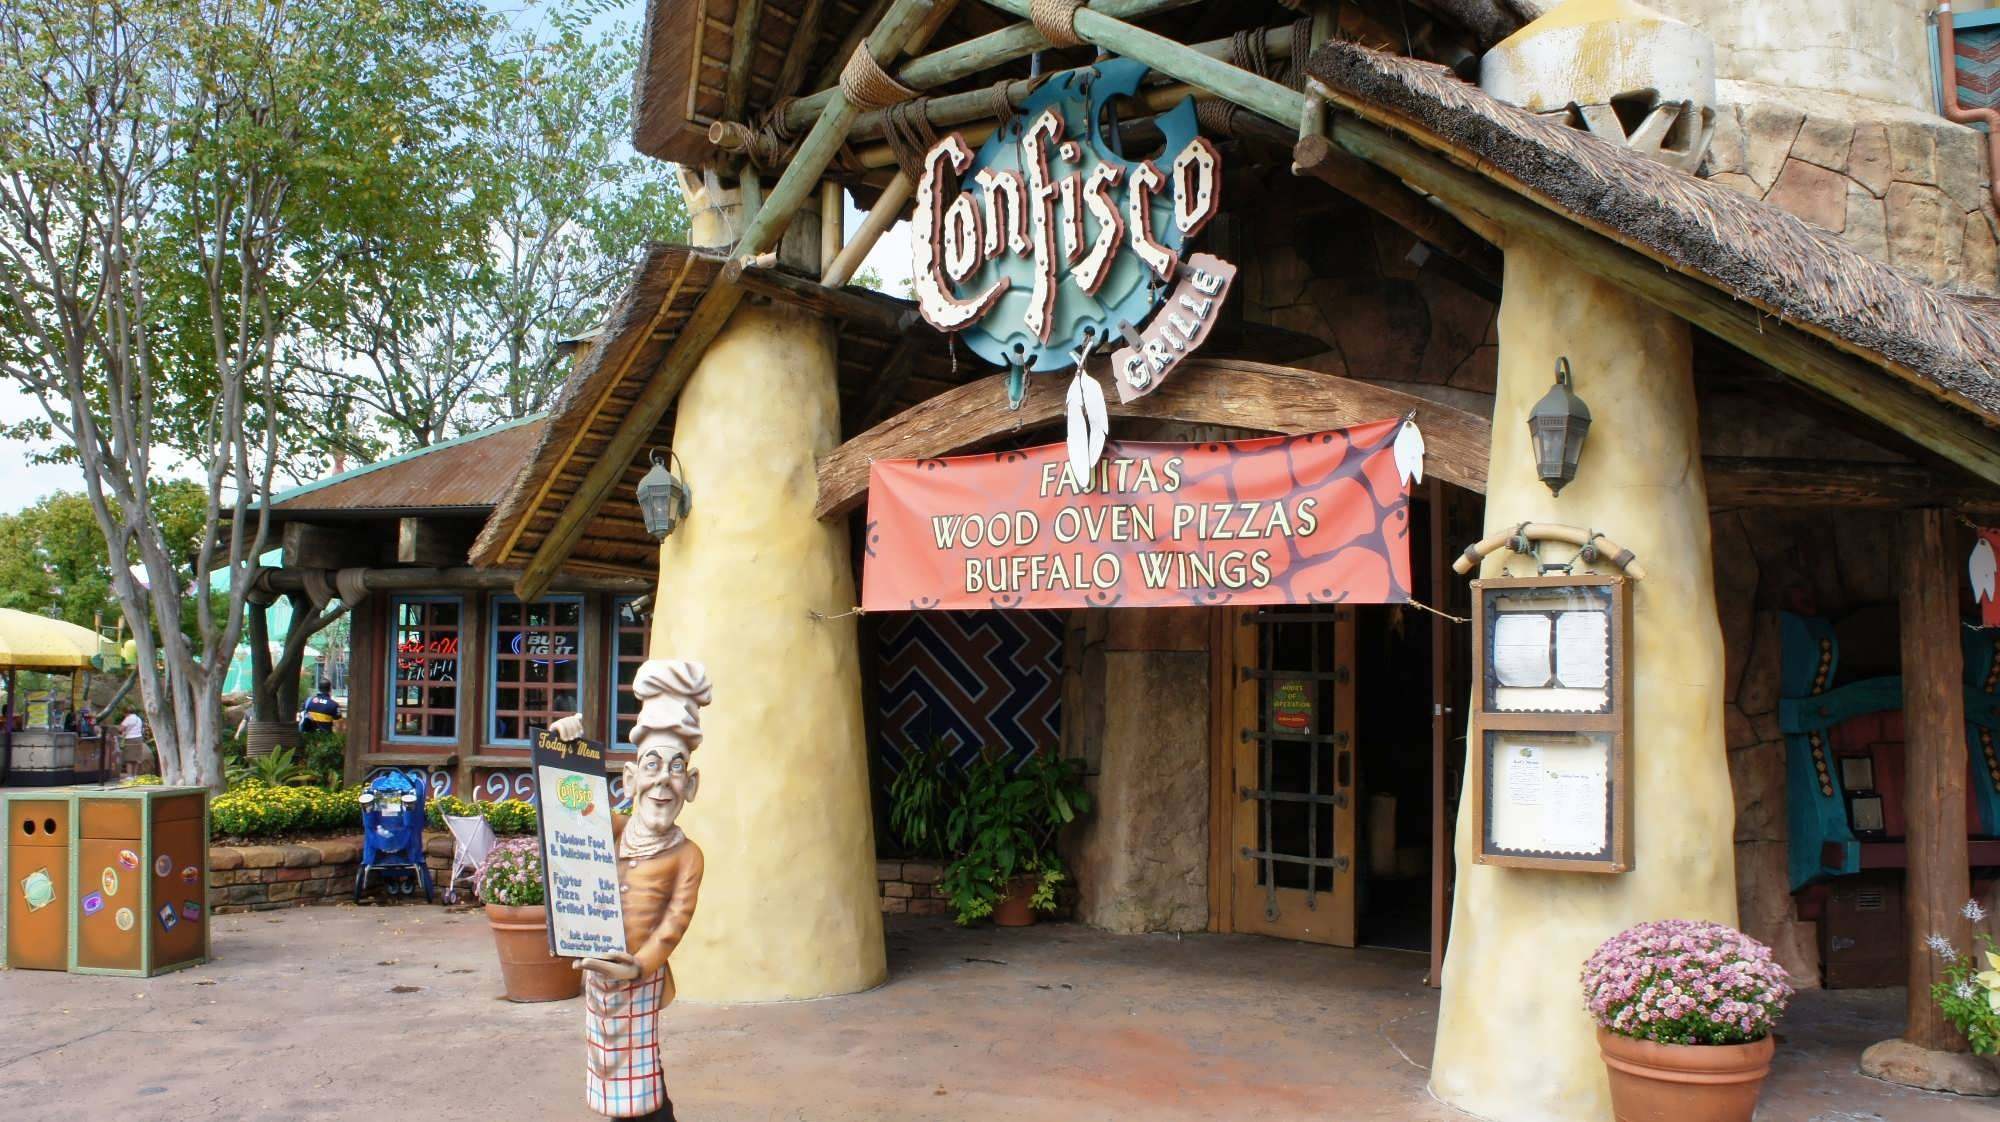 The entrance to Confisco Grille, Islands of Adventure